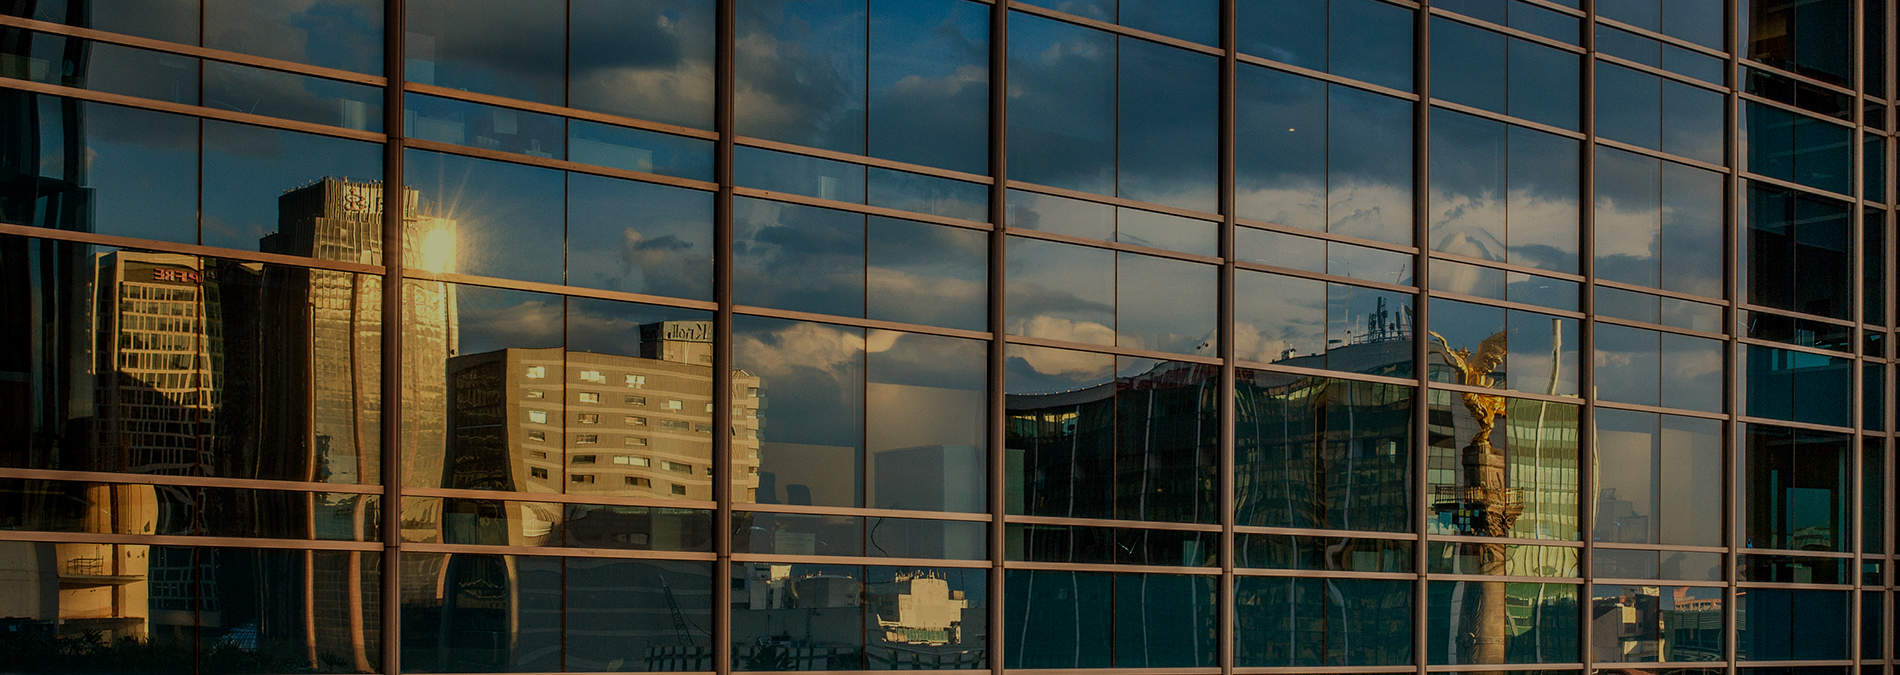 building-reflection_1900x675